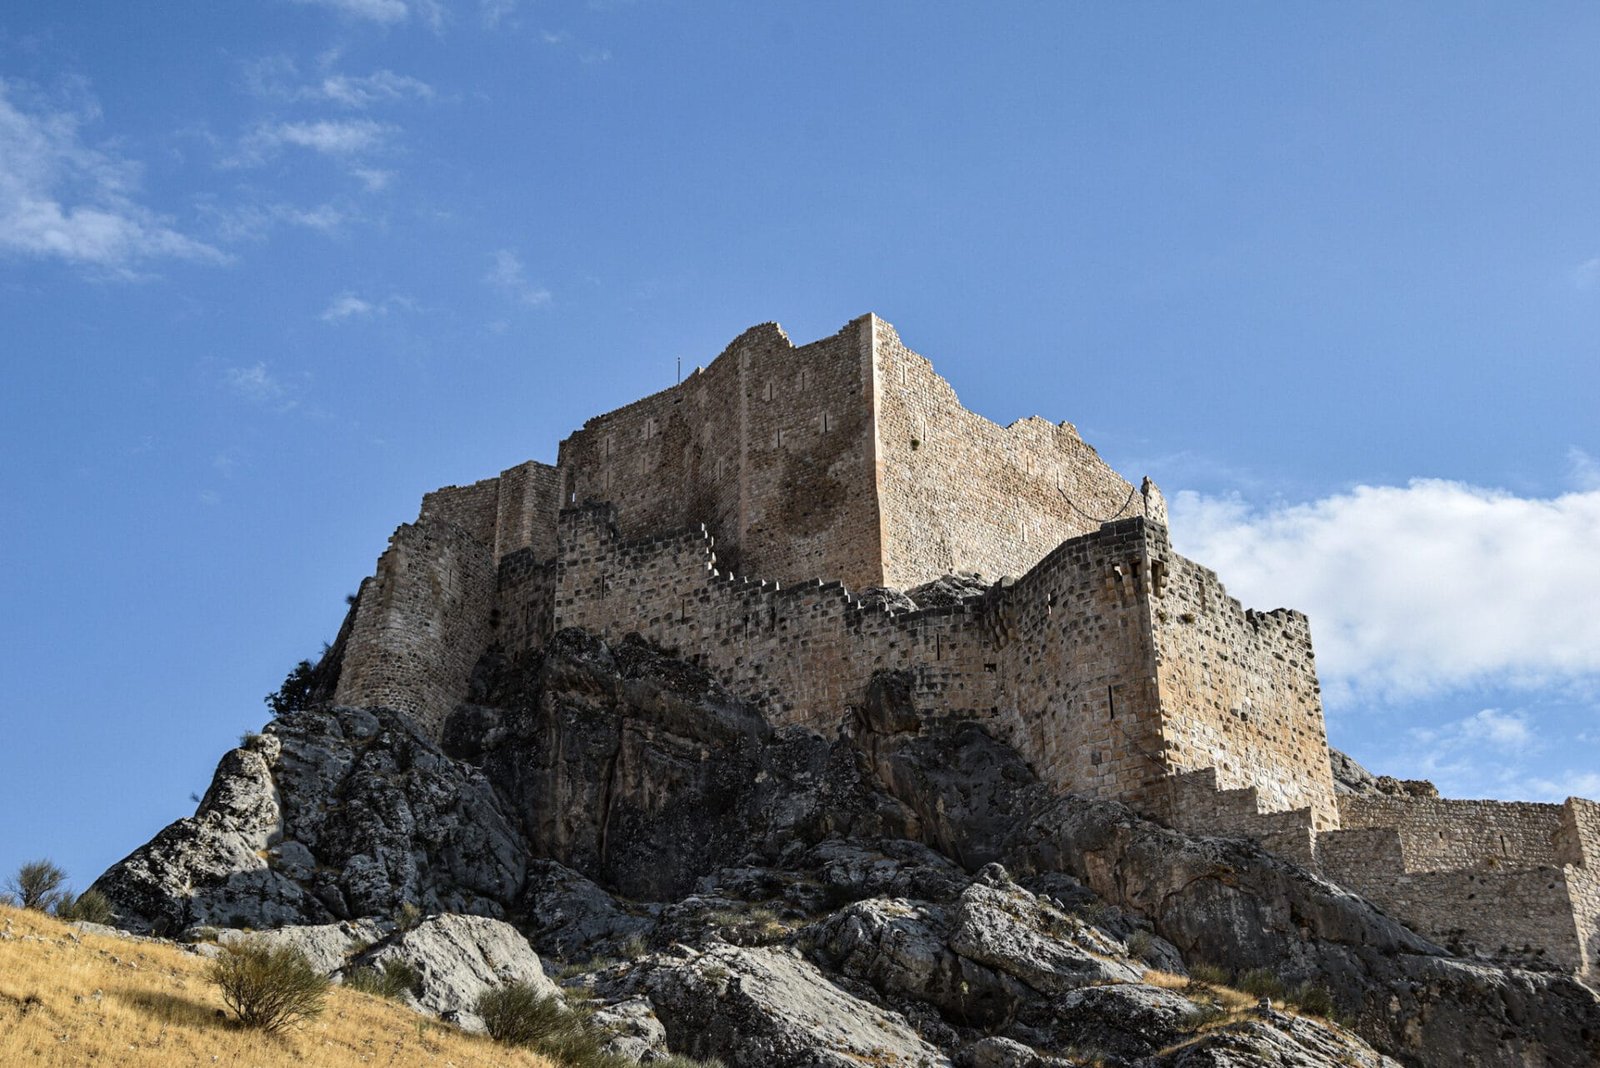 the citadel of Kahta perched on top a rocky outcrop